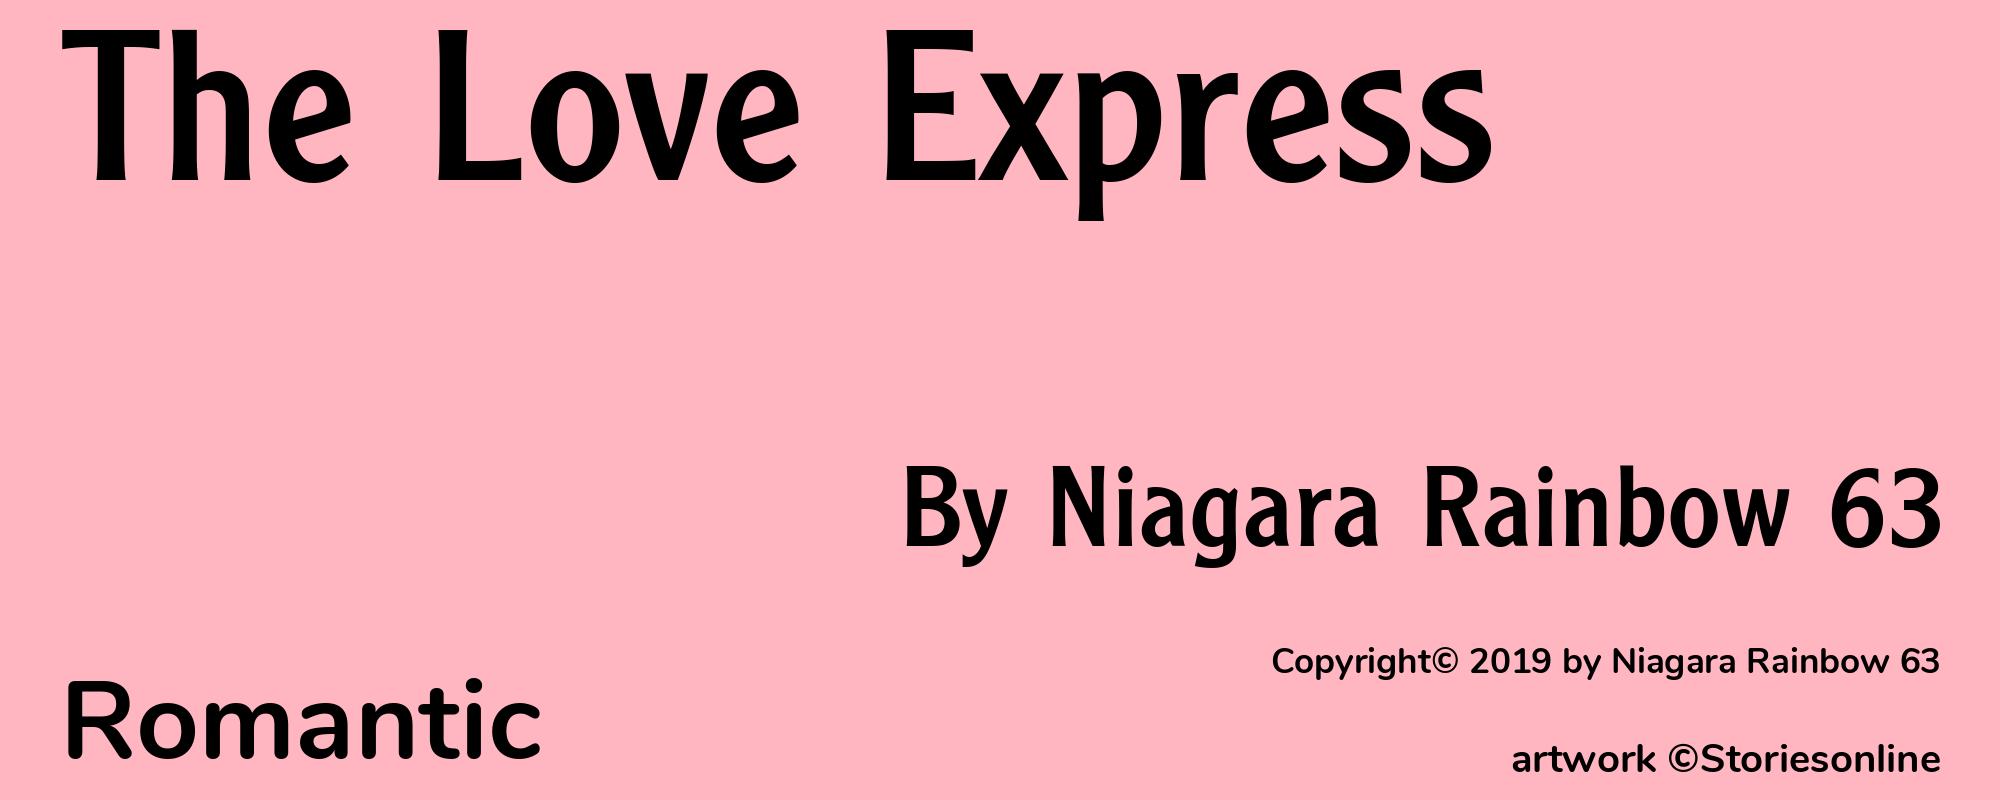 The Love Express - Cover